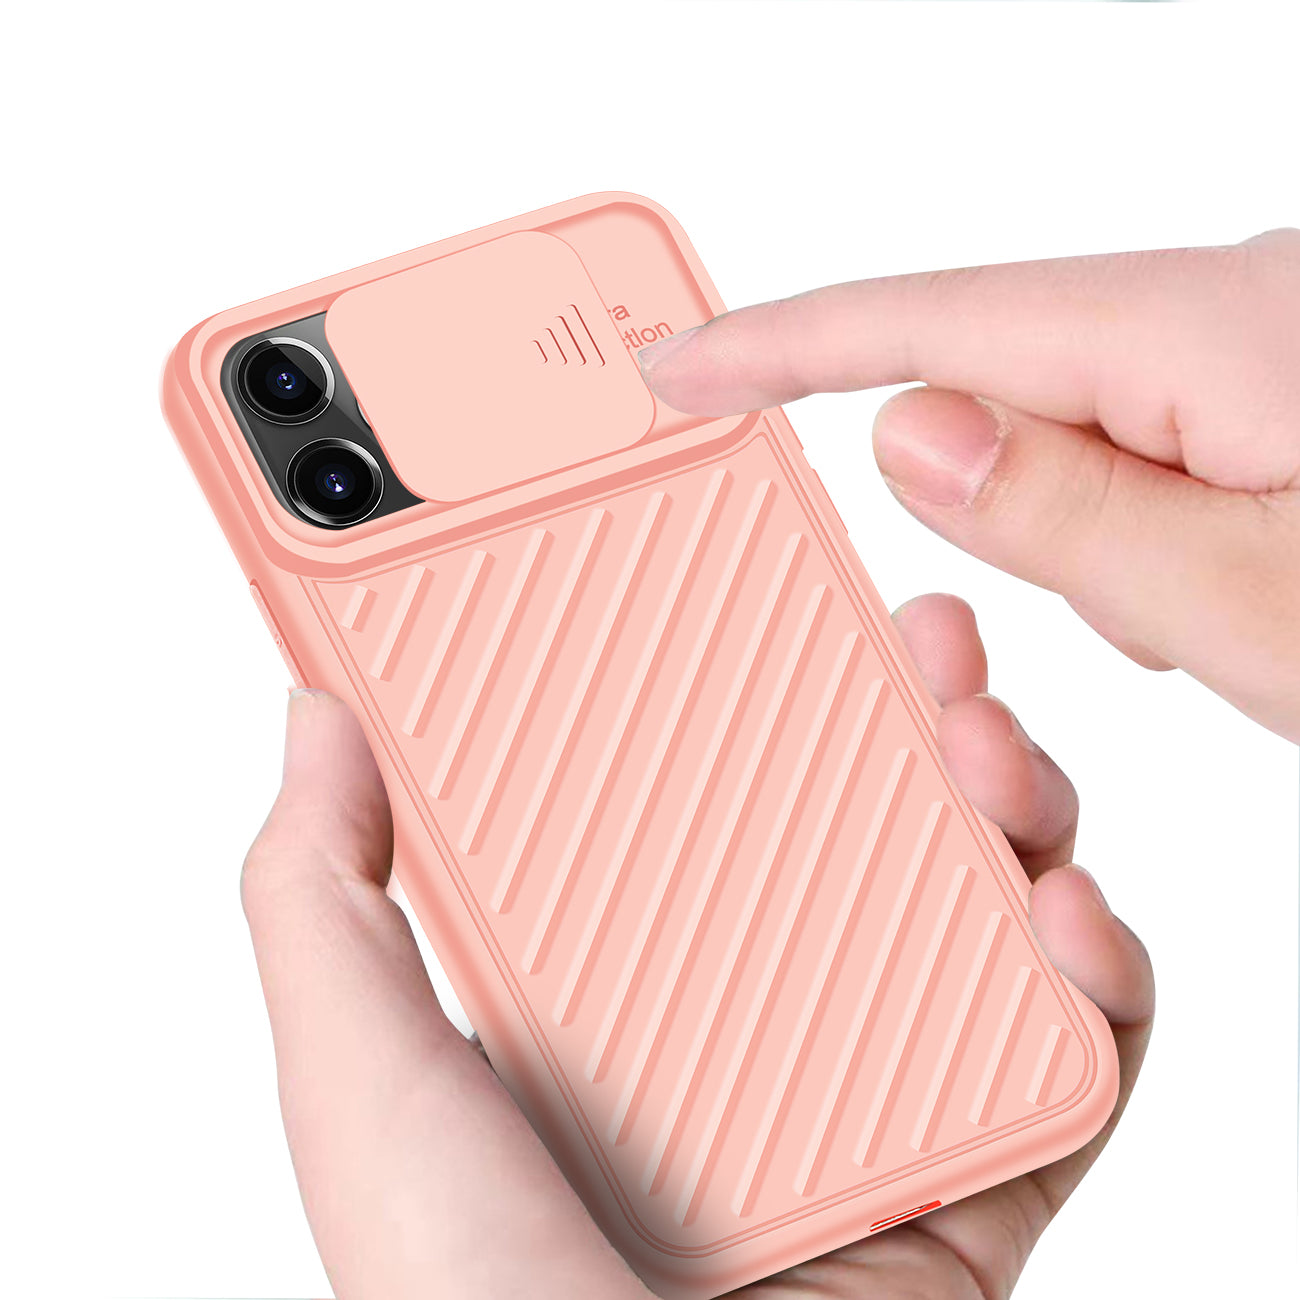 Camshield Series Case With Slide Camera CoverTpu Case For APPLE IPHONE 11 PRO MAX In PIn k